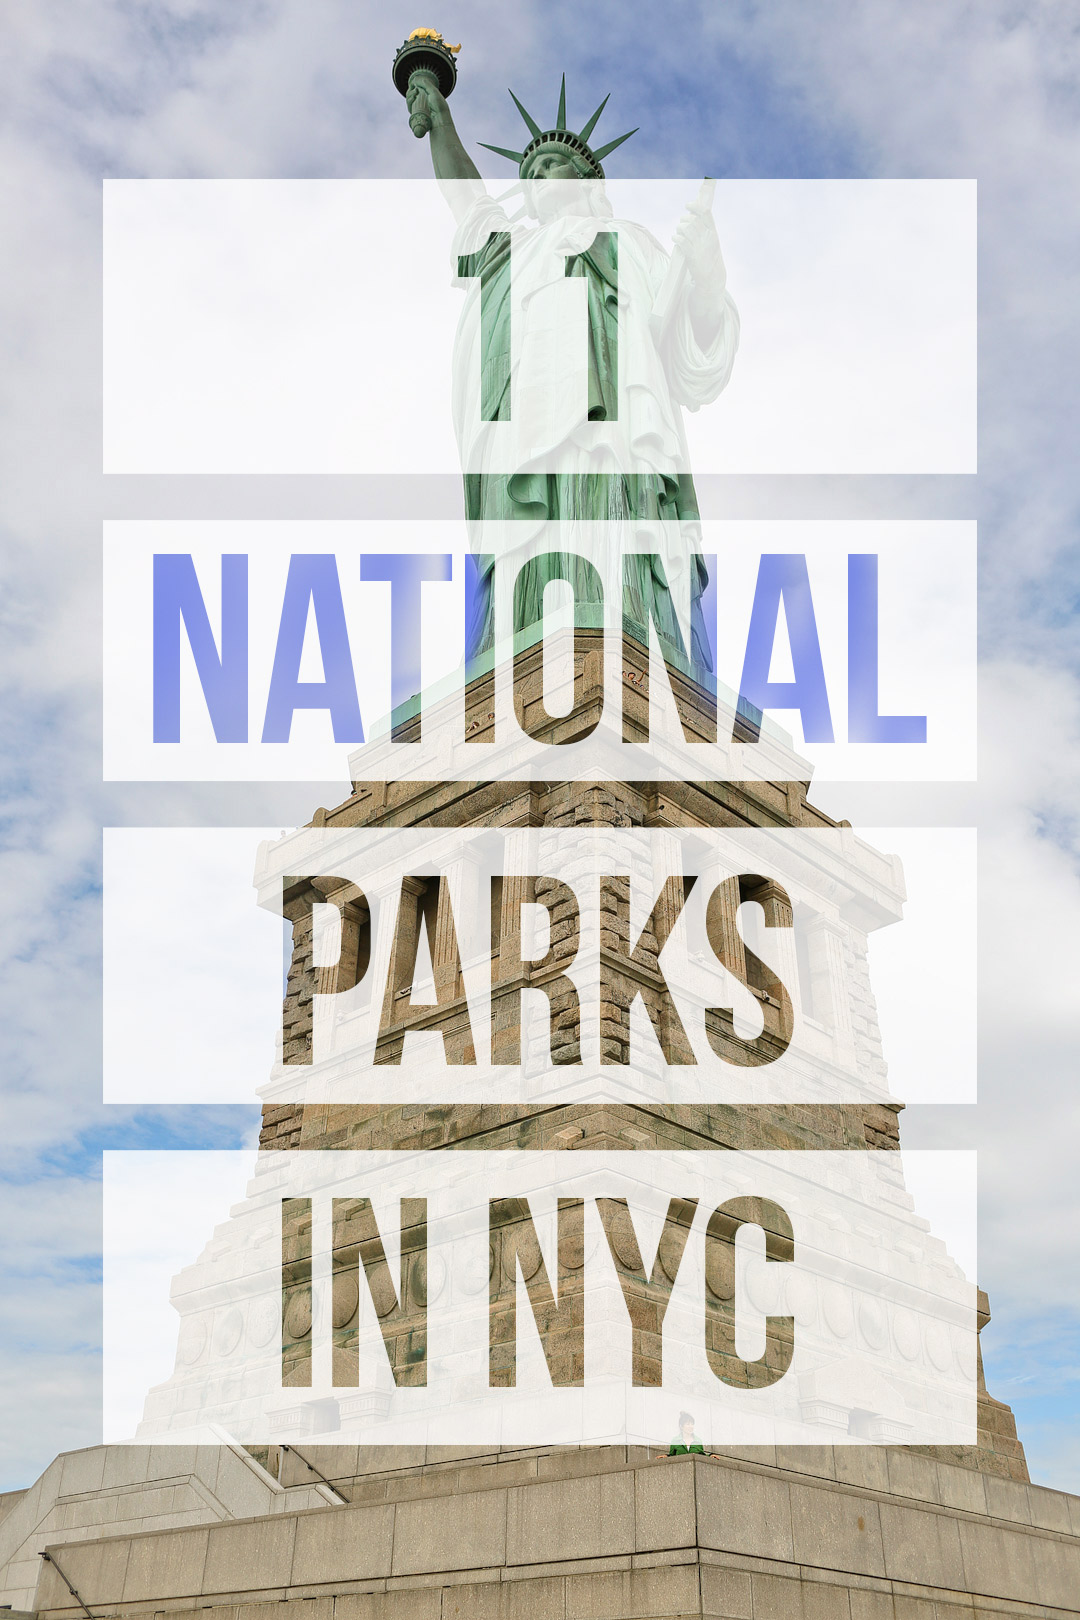 Visiting the big apple and want to see the national parks in new york city? Save this pin and click through to learn about all 11. We include tips to help you plan your visit to some of the best east coast national parks, like the Statue of Liberty National Monument. We also have resources like NYs parks map, a list of state parks in upstate ny, and national parks in upstate new york. // Local Adventurer #seeyourcity #nycgo #nyc #iloveny #newyork #newyorkcity #visittheusa